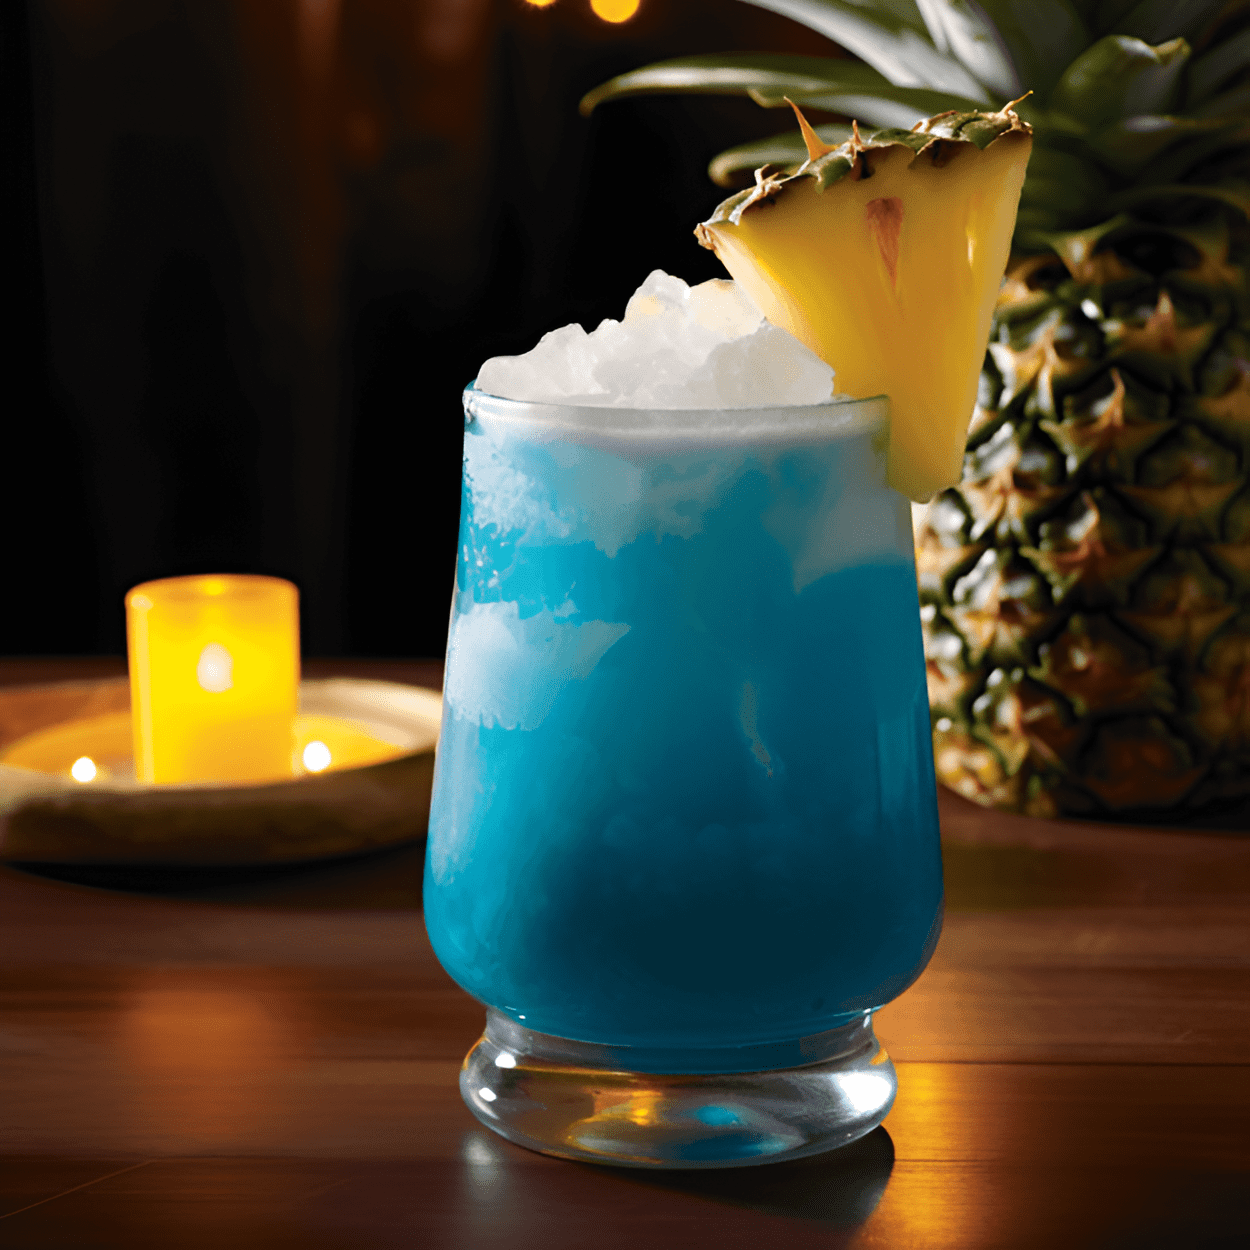 Sweet Poison Cocktail Recipe - The Sweet Poison is a delightful blend of sweet and sour, with a strong fruity flavor. The pineapple juice adds a tropical sweetness, while the coconut rum gives it a creamy, exotic twist. The blue curacao adds a hint of citrus and a beautiful blue hue, while the light rum provides a strong, boozy kick.